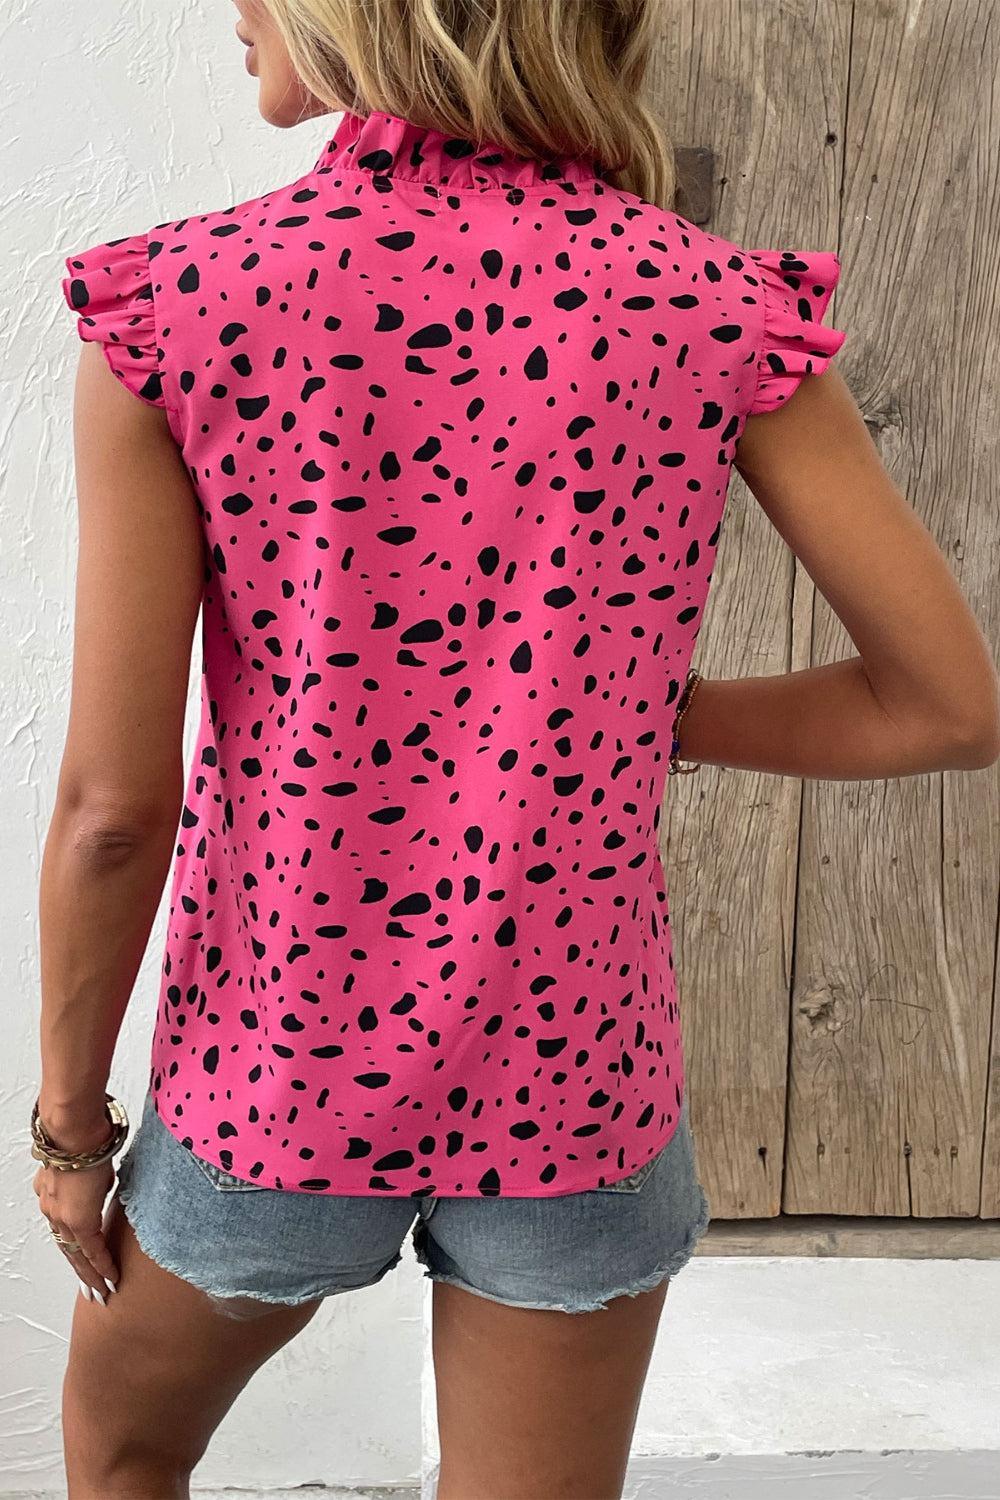 a woman wearing a pink top with black spots